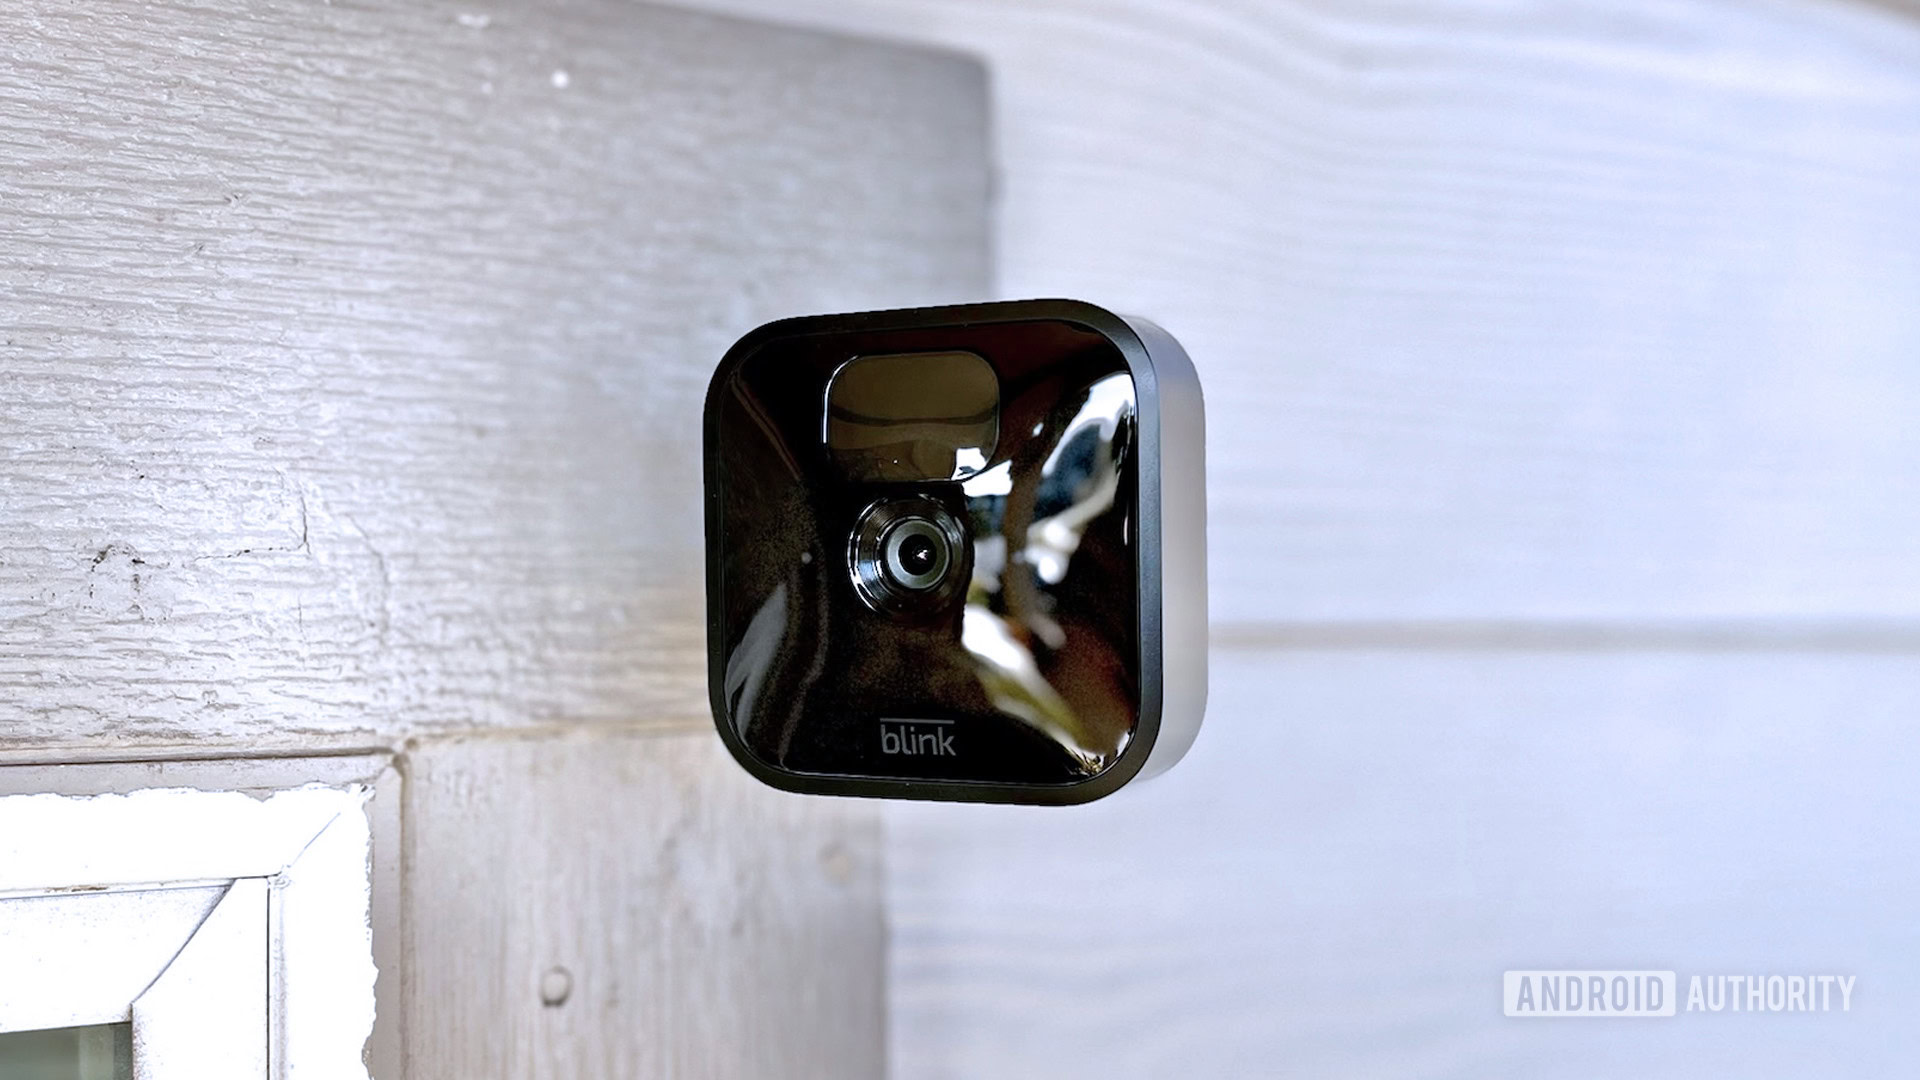 A side angle of the Blink Outdoor camera